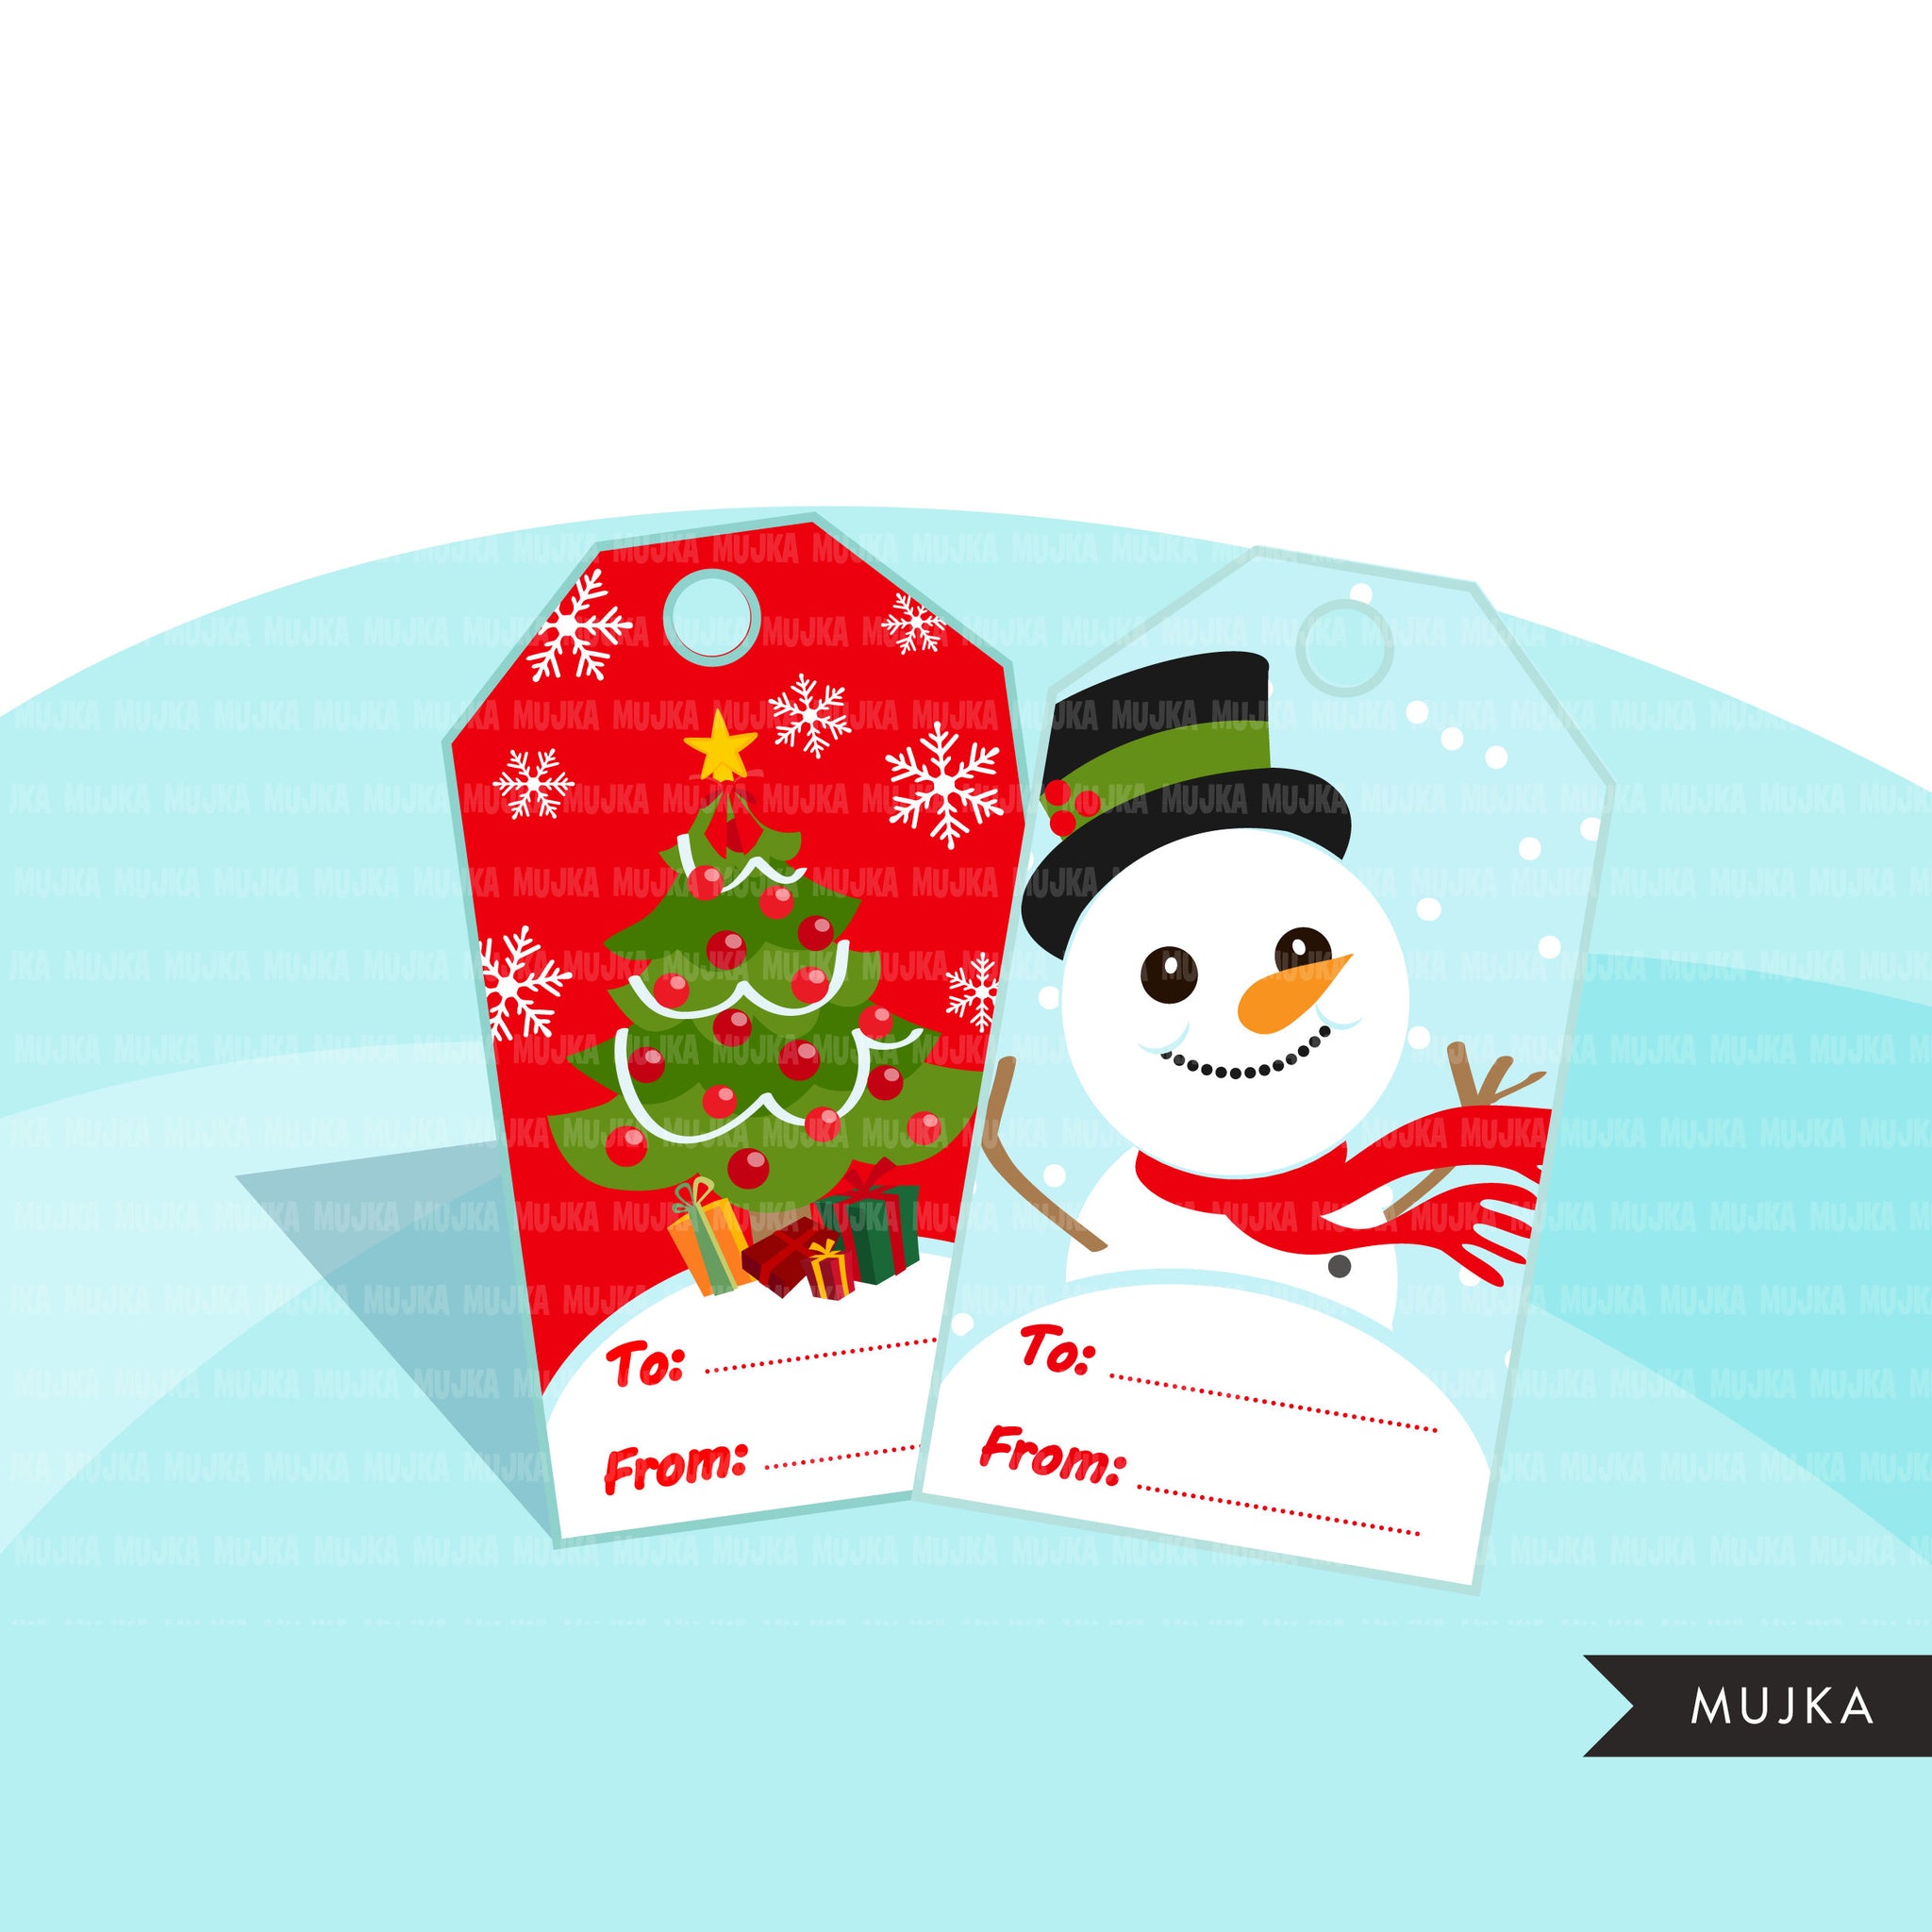 12 Snowman Png, Snowman Clipart, Christmas Clipart,christmas Snowman, Cute  Snowman Png,winter Clipart, Digital Download, Commercial Use -  Israel